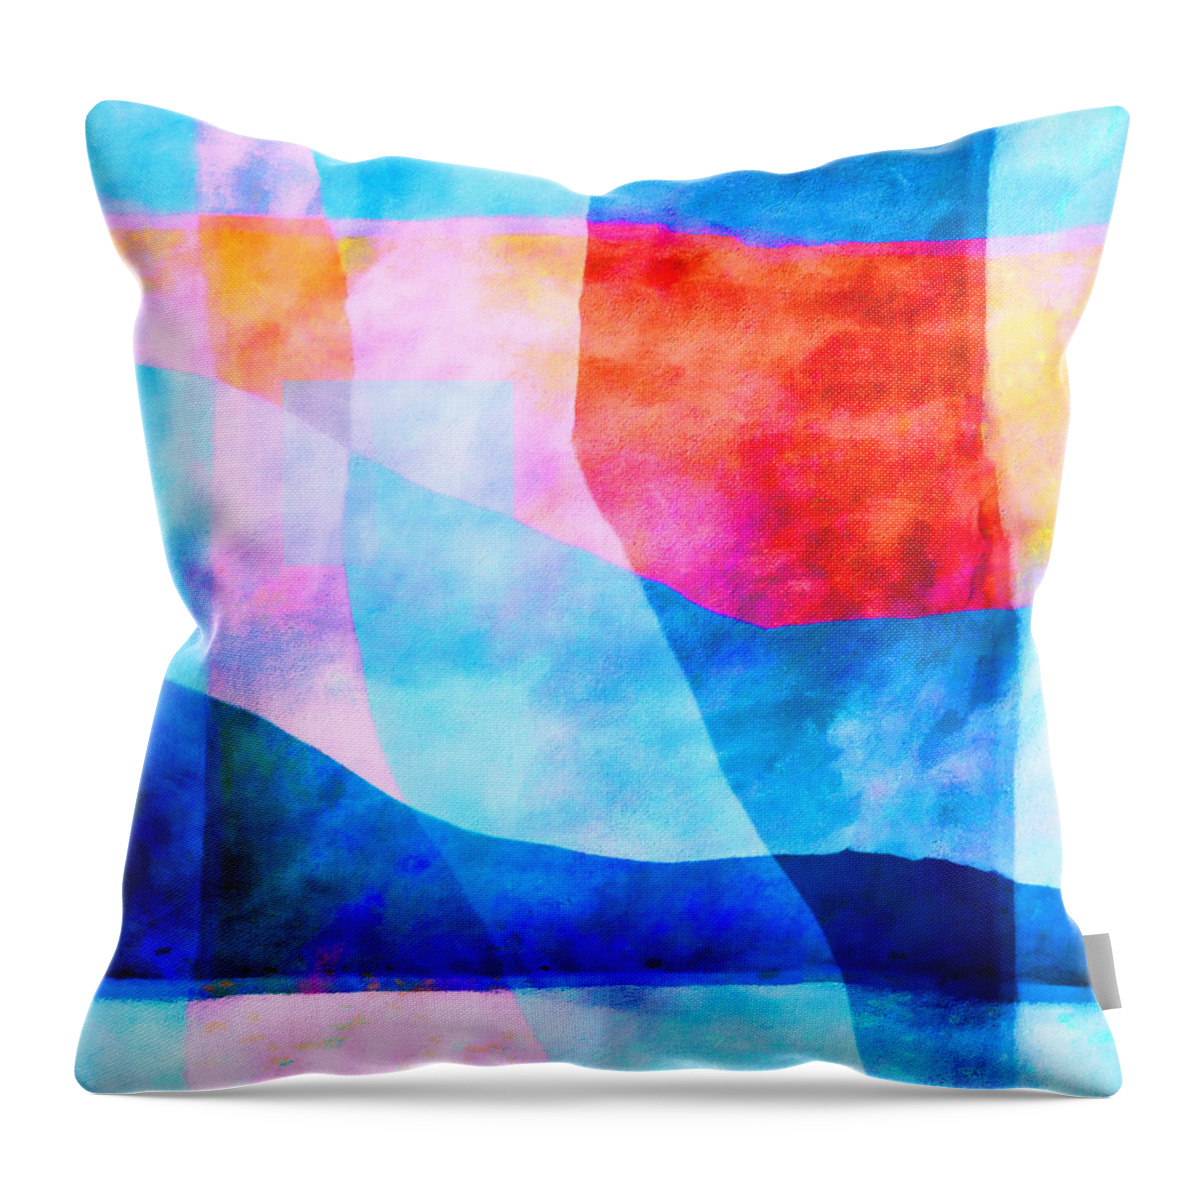 Translucent Throw Pillow featuring the photograph Translucence Number 4 by Carol Leigh